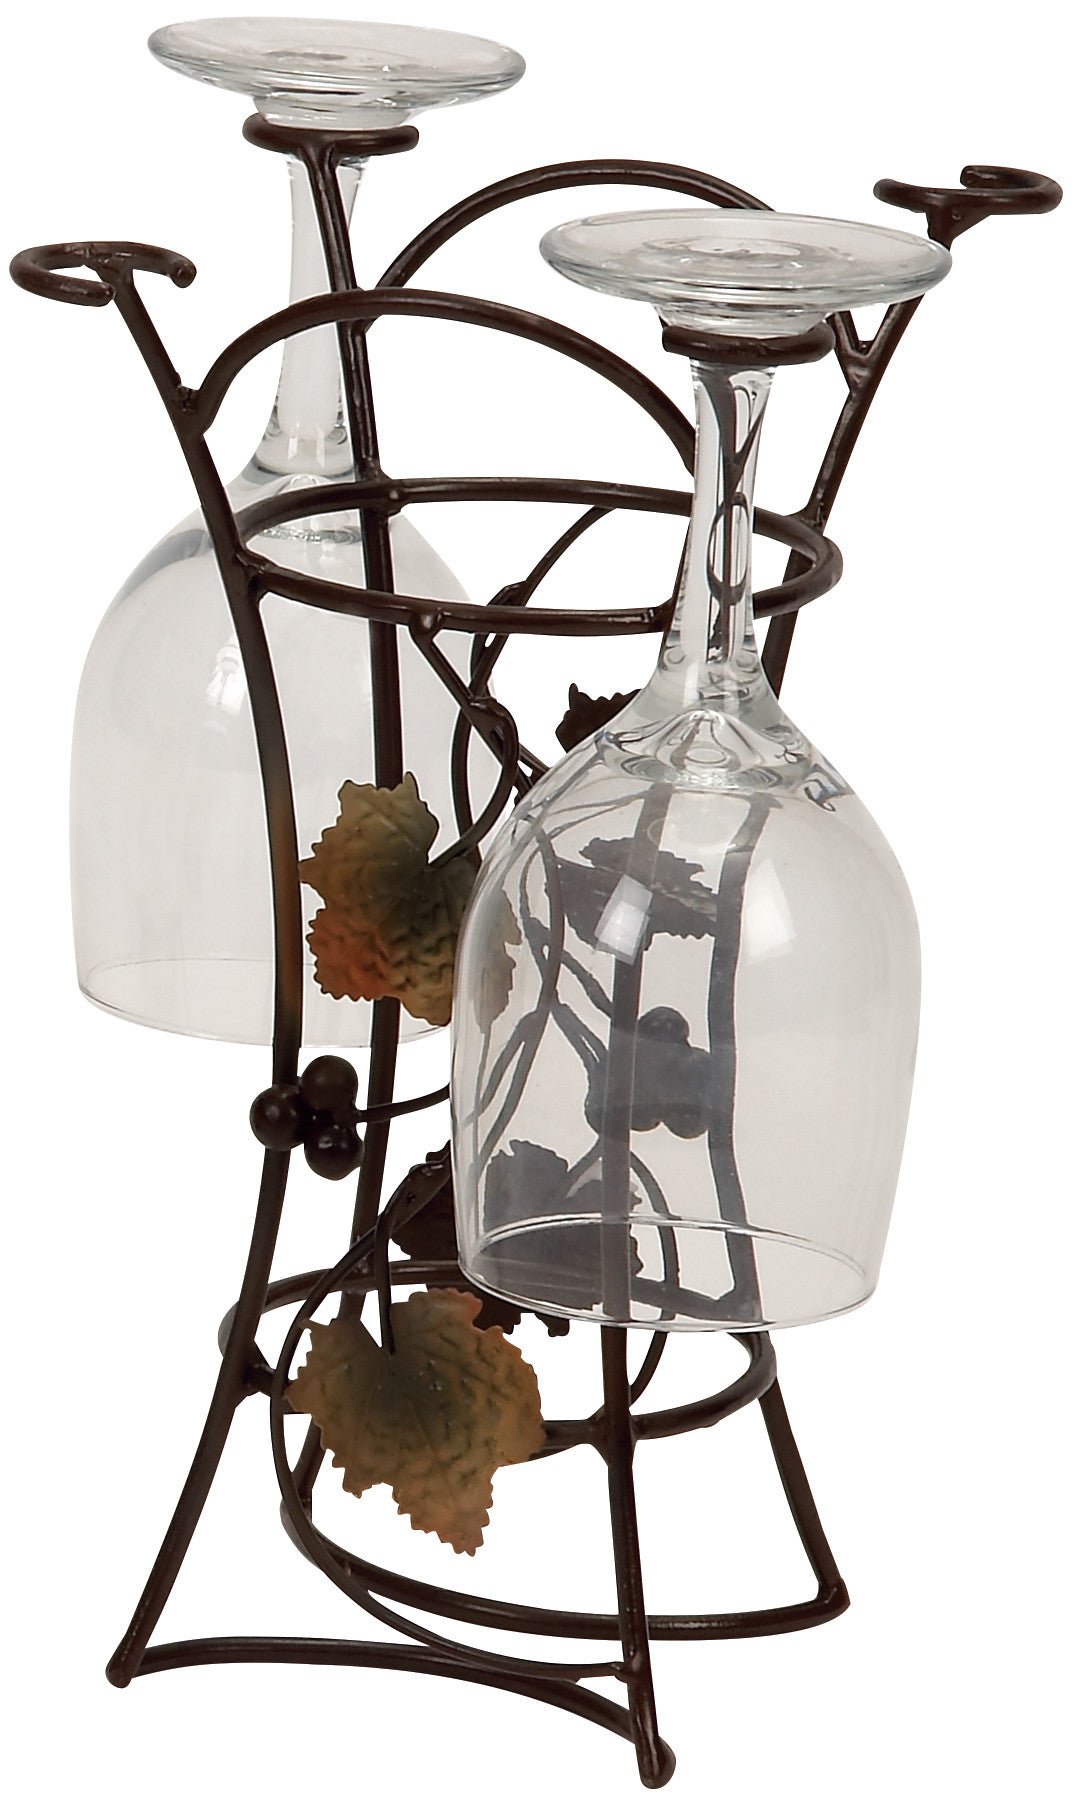 Black wrought iron tapered wine glass rack with two arched handles and four curved glass holders, brown cut-out leaves and black grape clusters